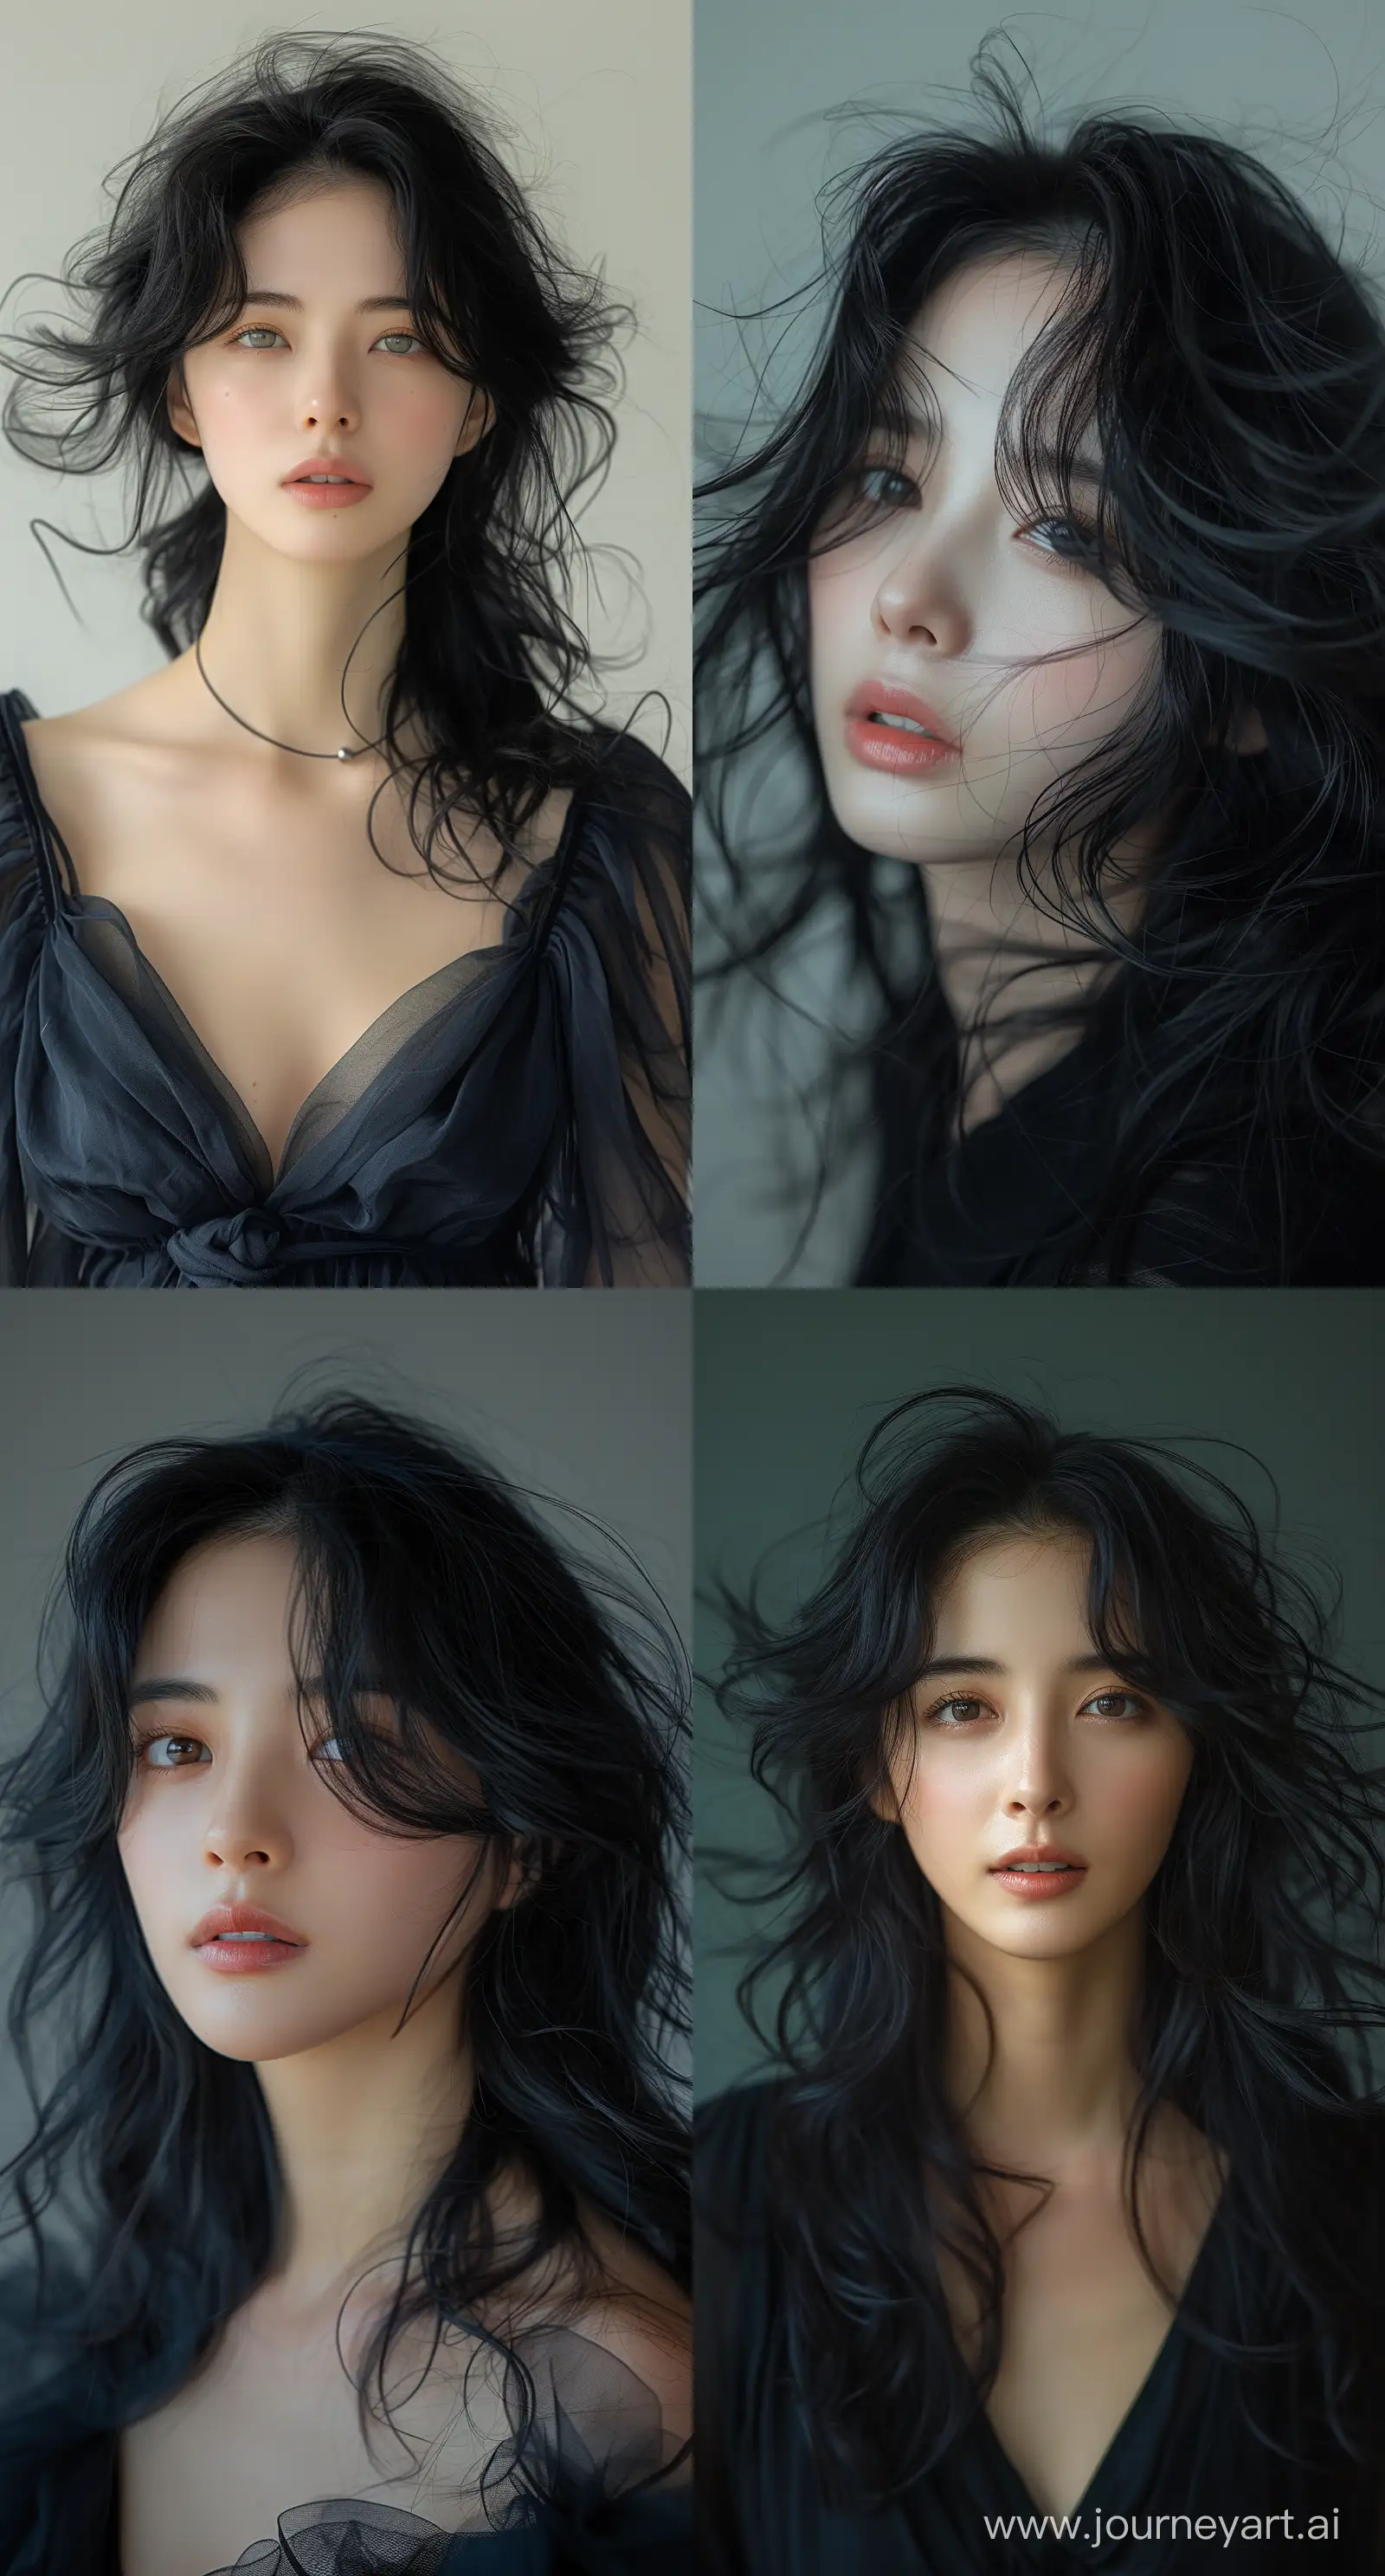 Multilayered-Portrait-of-a-Woman-with-Flowing-Black-Hair-in-Dain-Yoon-Style